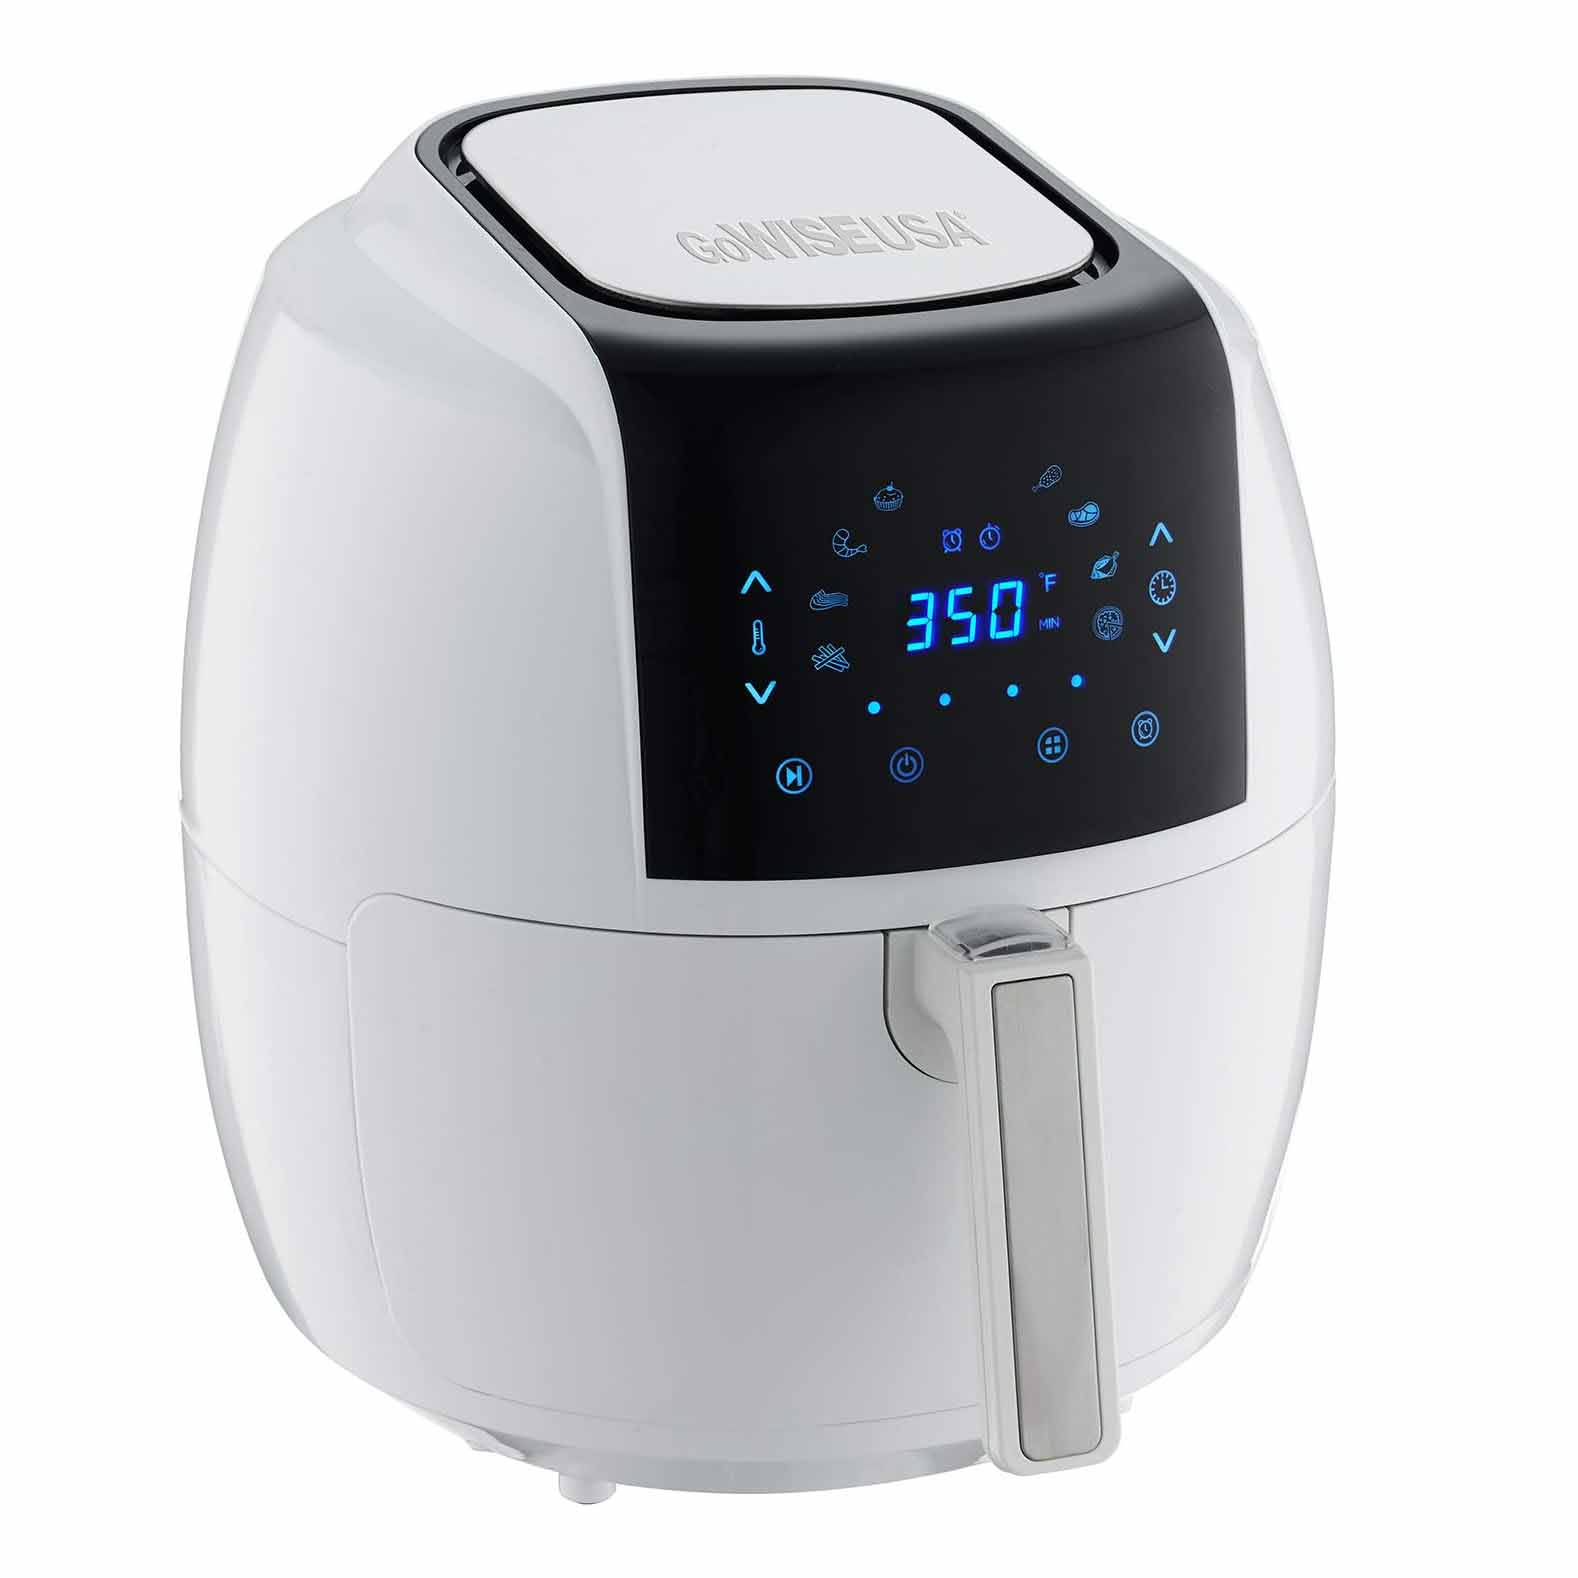 GoWISE USA XL 8-in-1 Digital Air Fryer with Recipe Book in white 